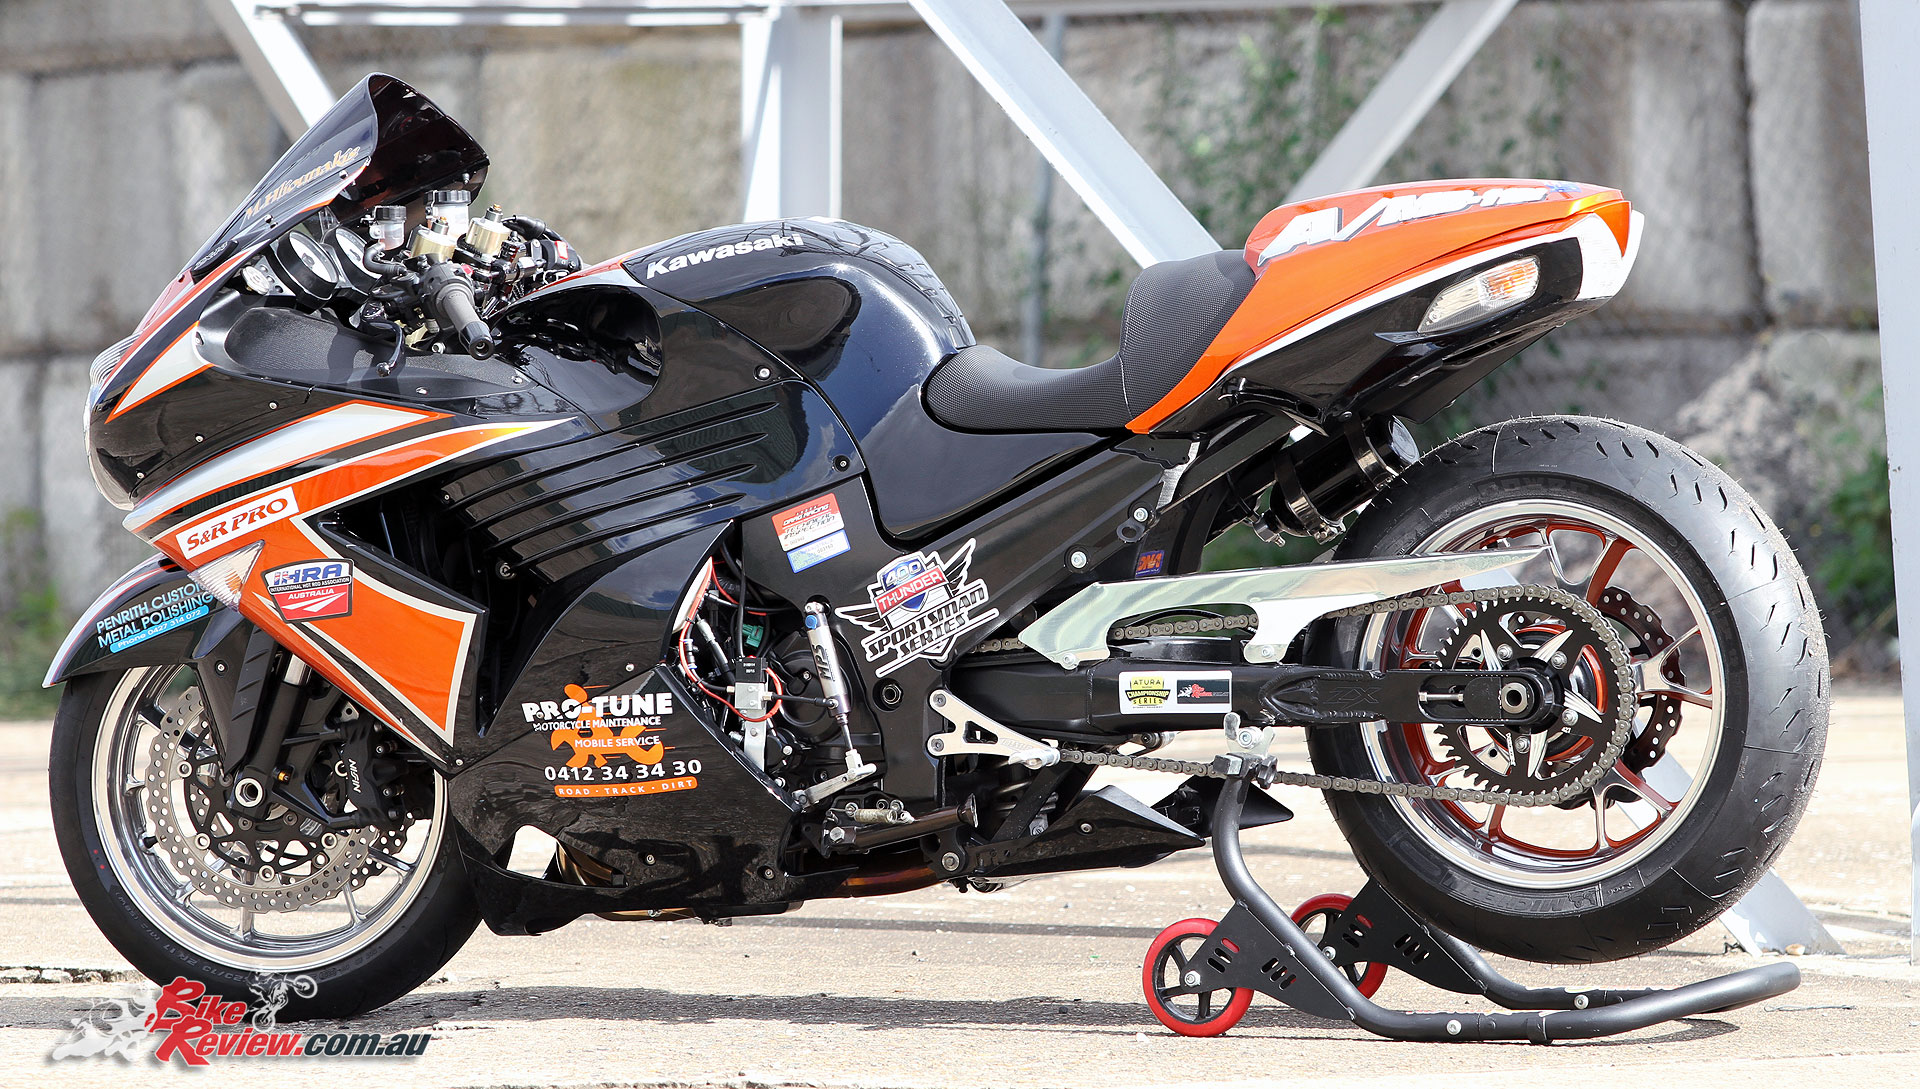 Custom: Nine-second ZX-14 Dragster Toothless - Bike Review